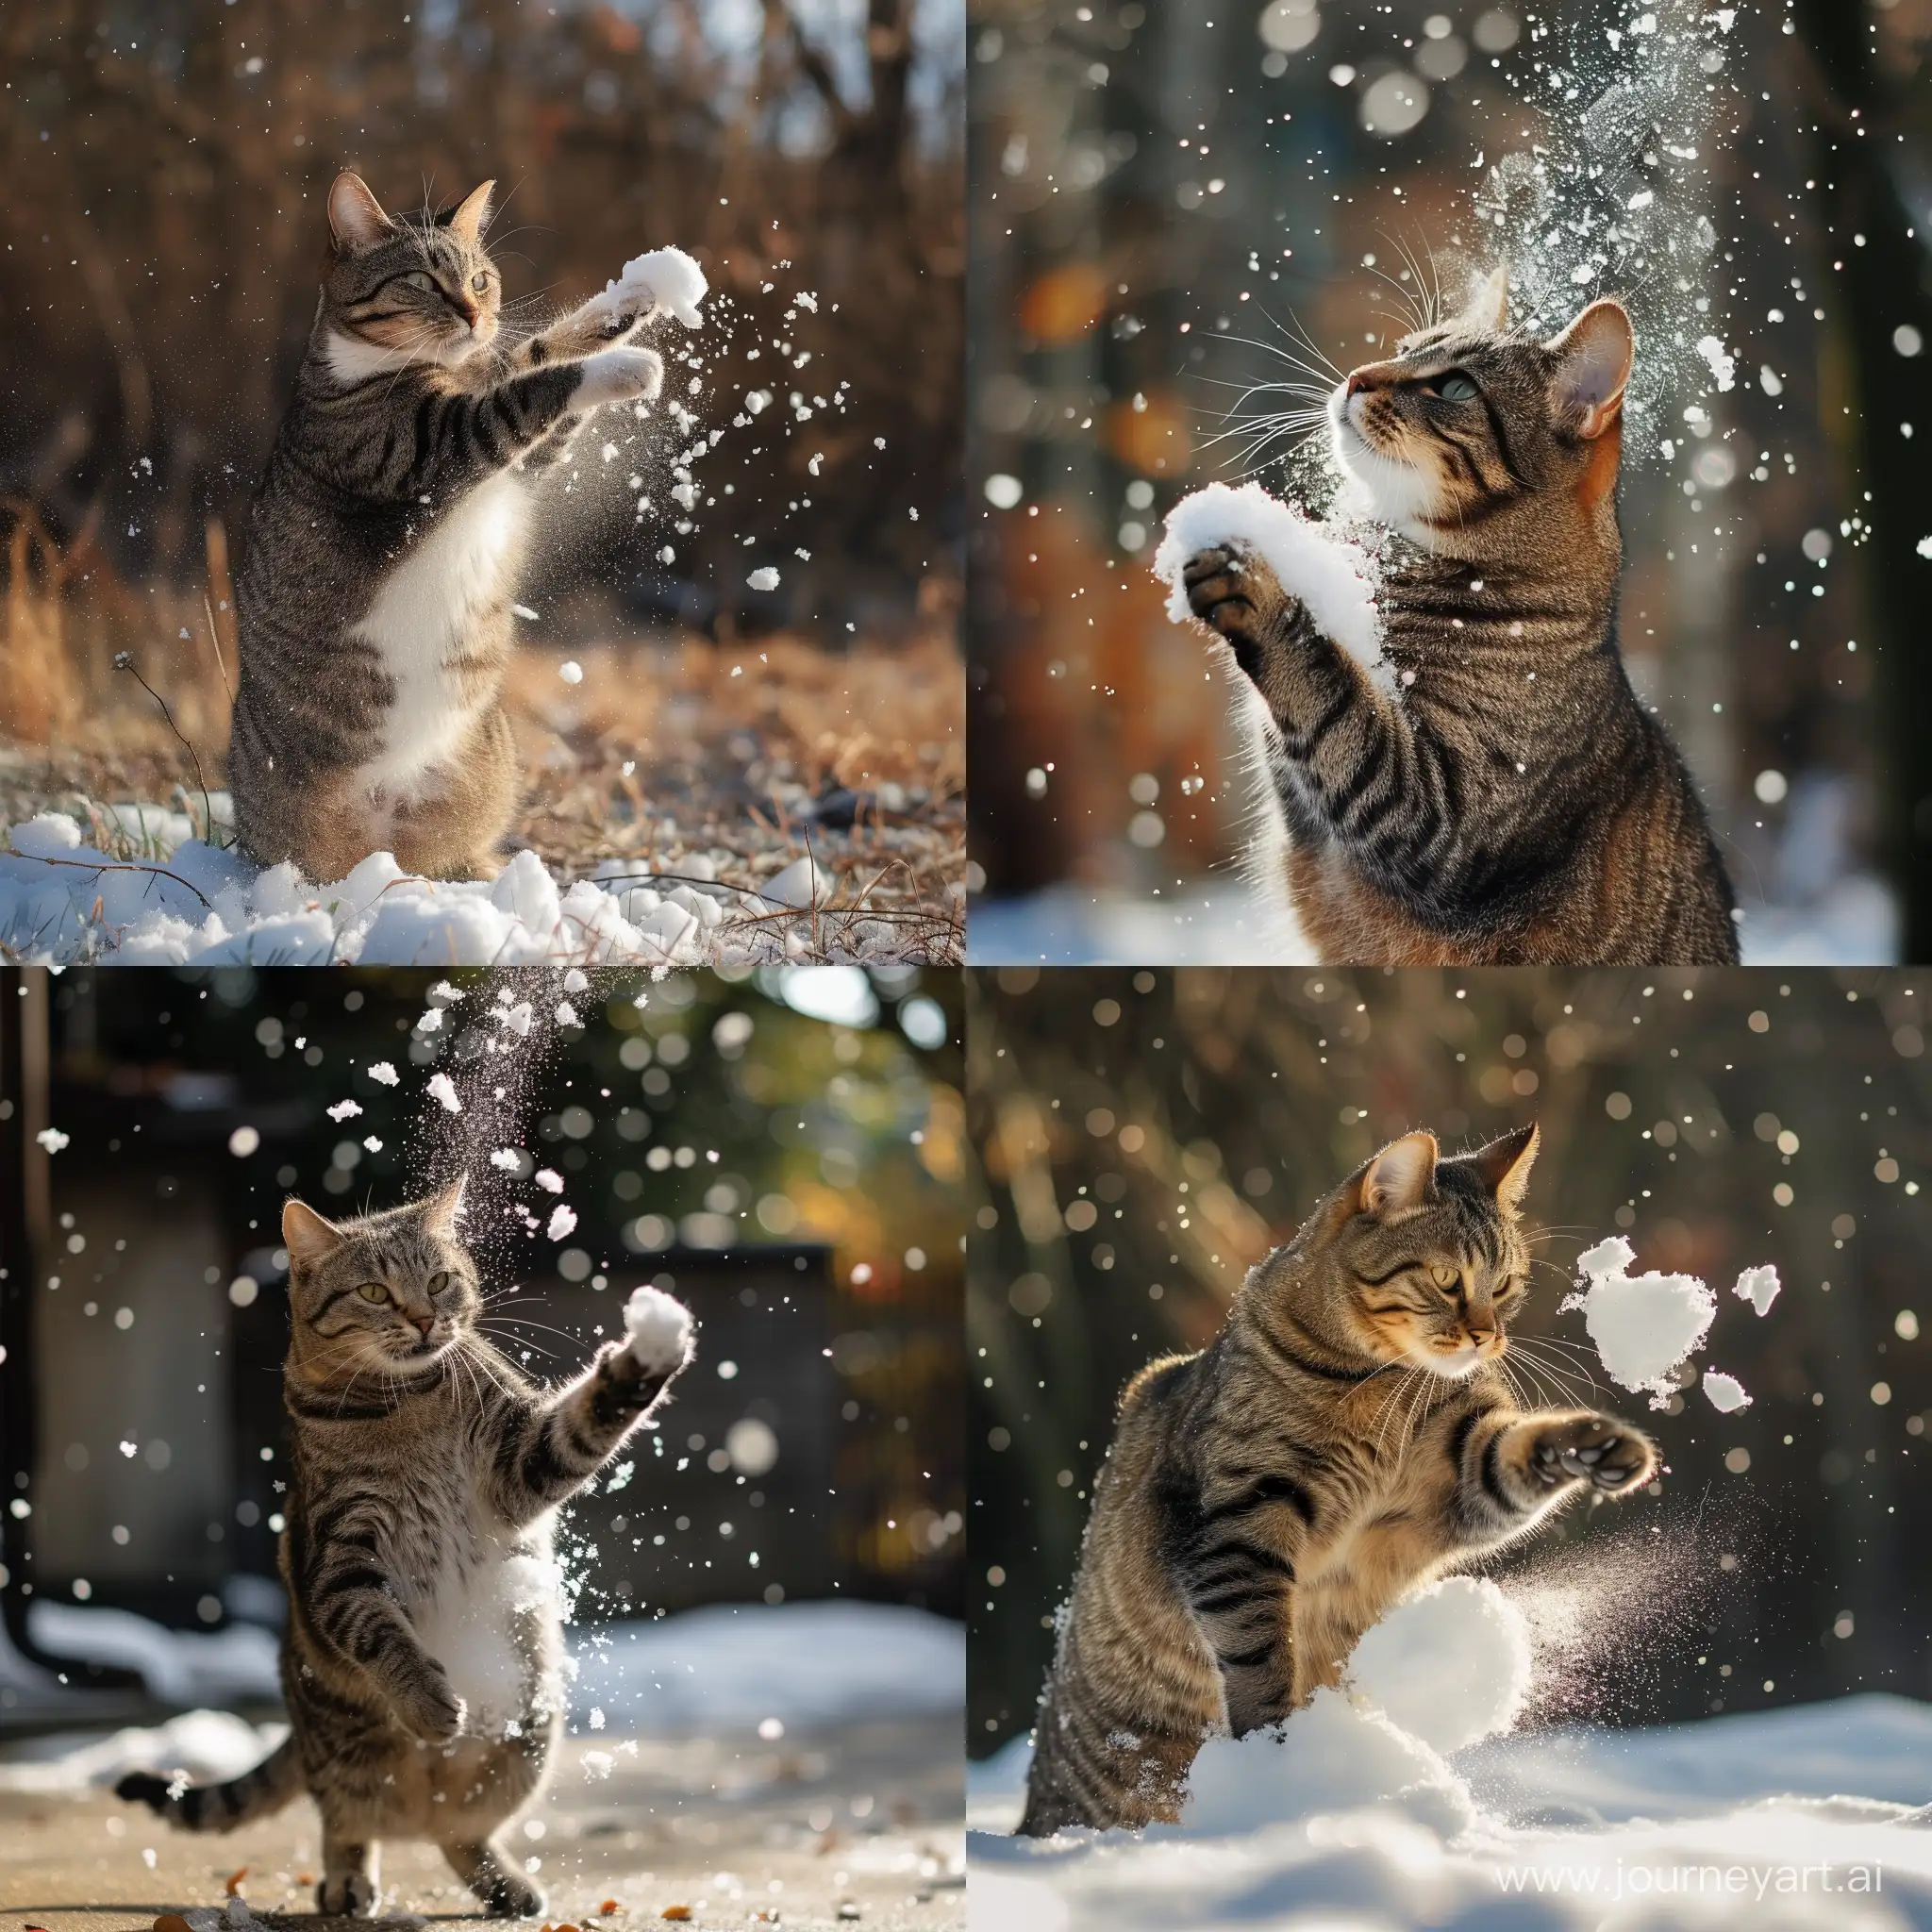 A cat throwing snow